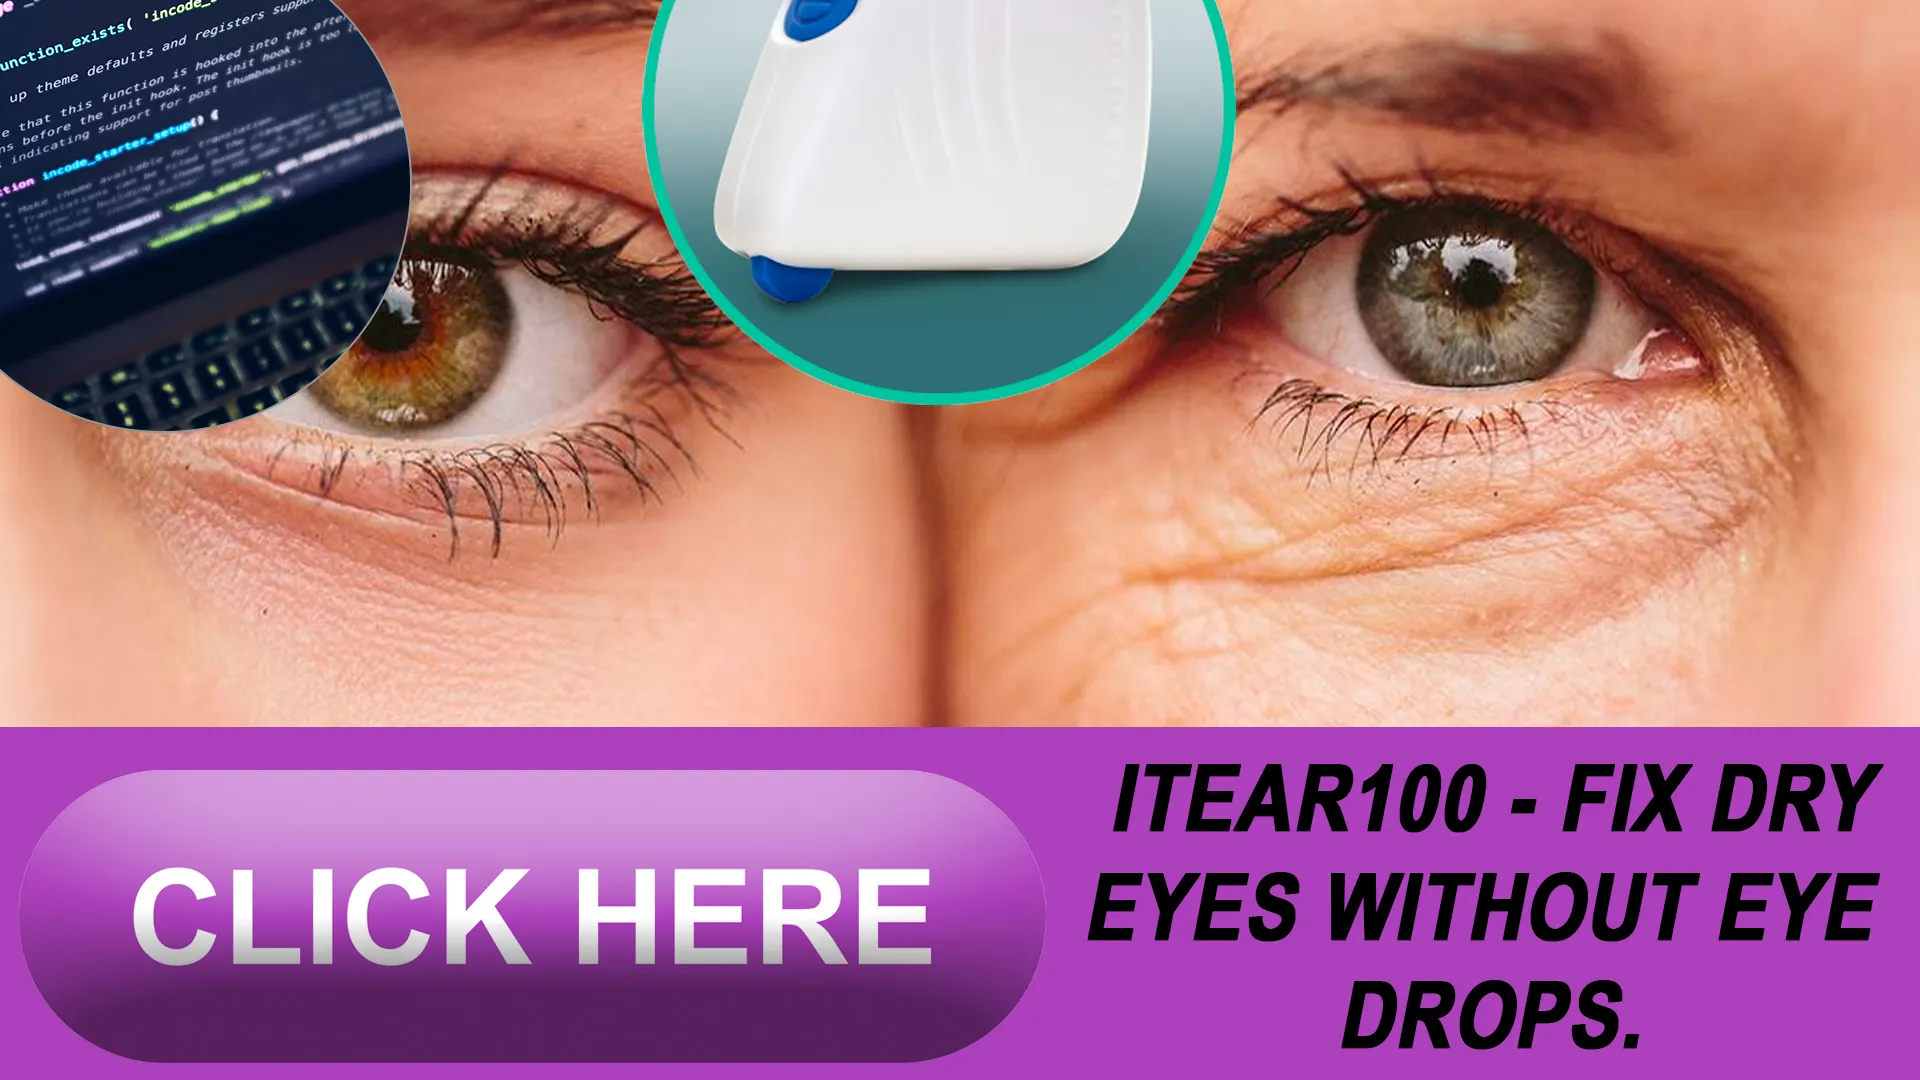 A Natural Approach to Managing Dry Eye Symptoms